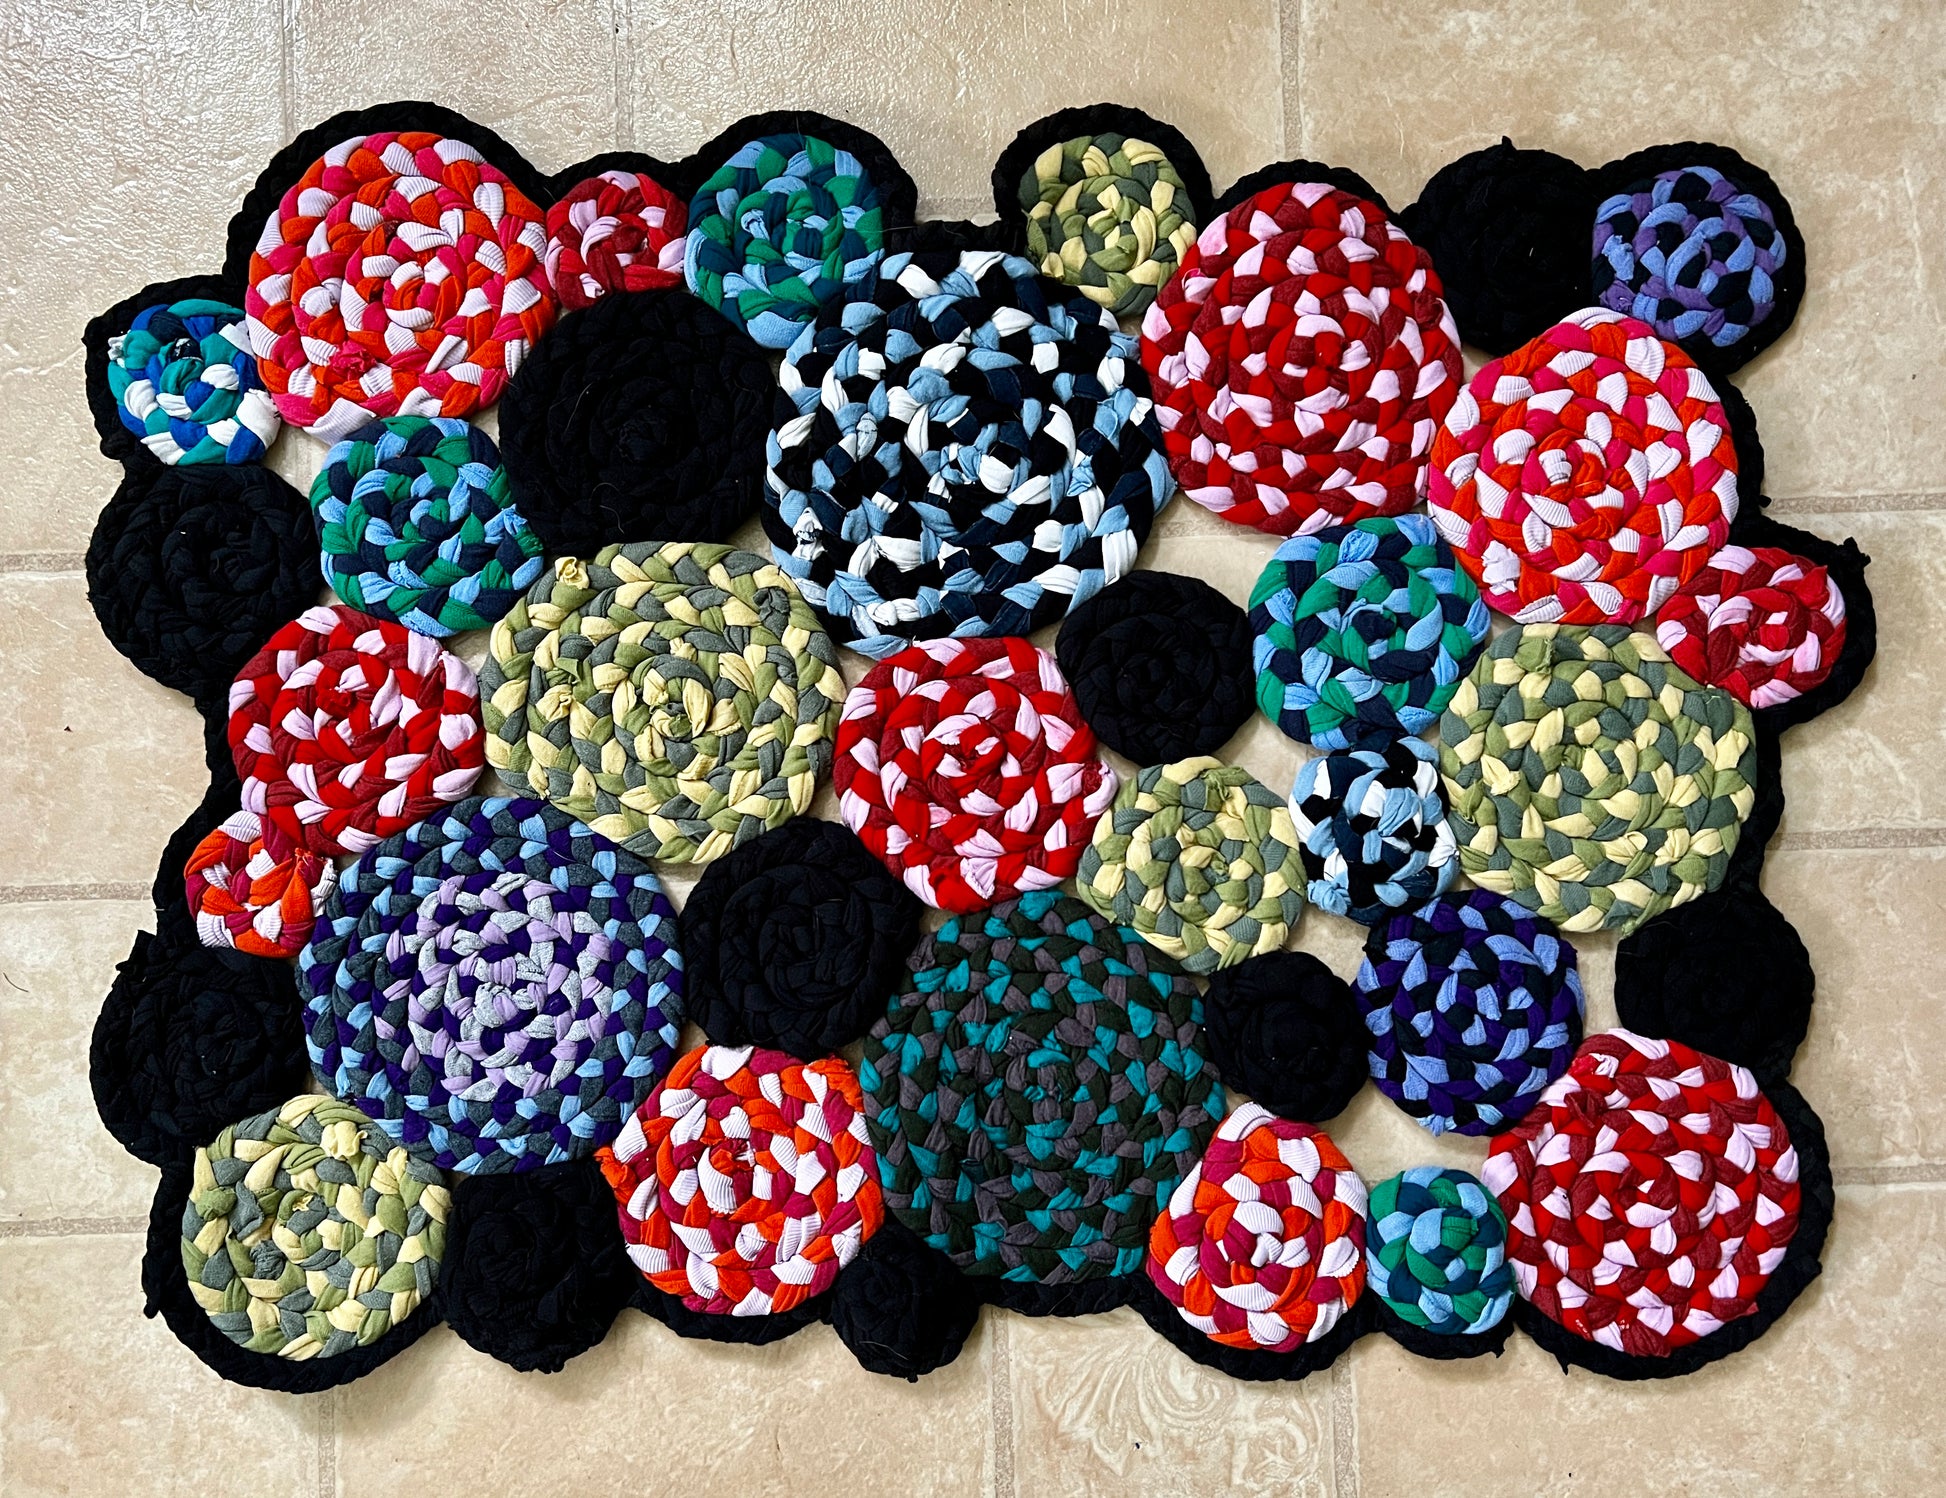 a circle collage handbraided and hand sewn doormat rug in vibrant colors